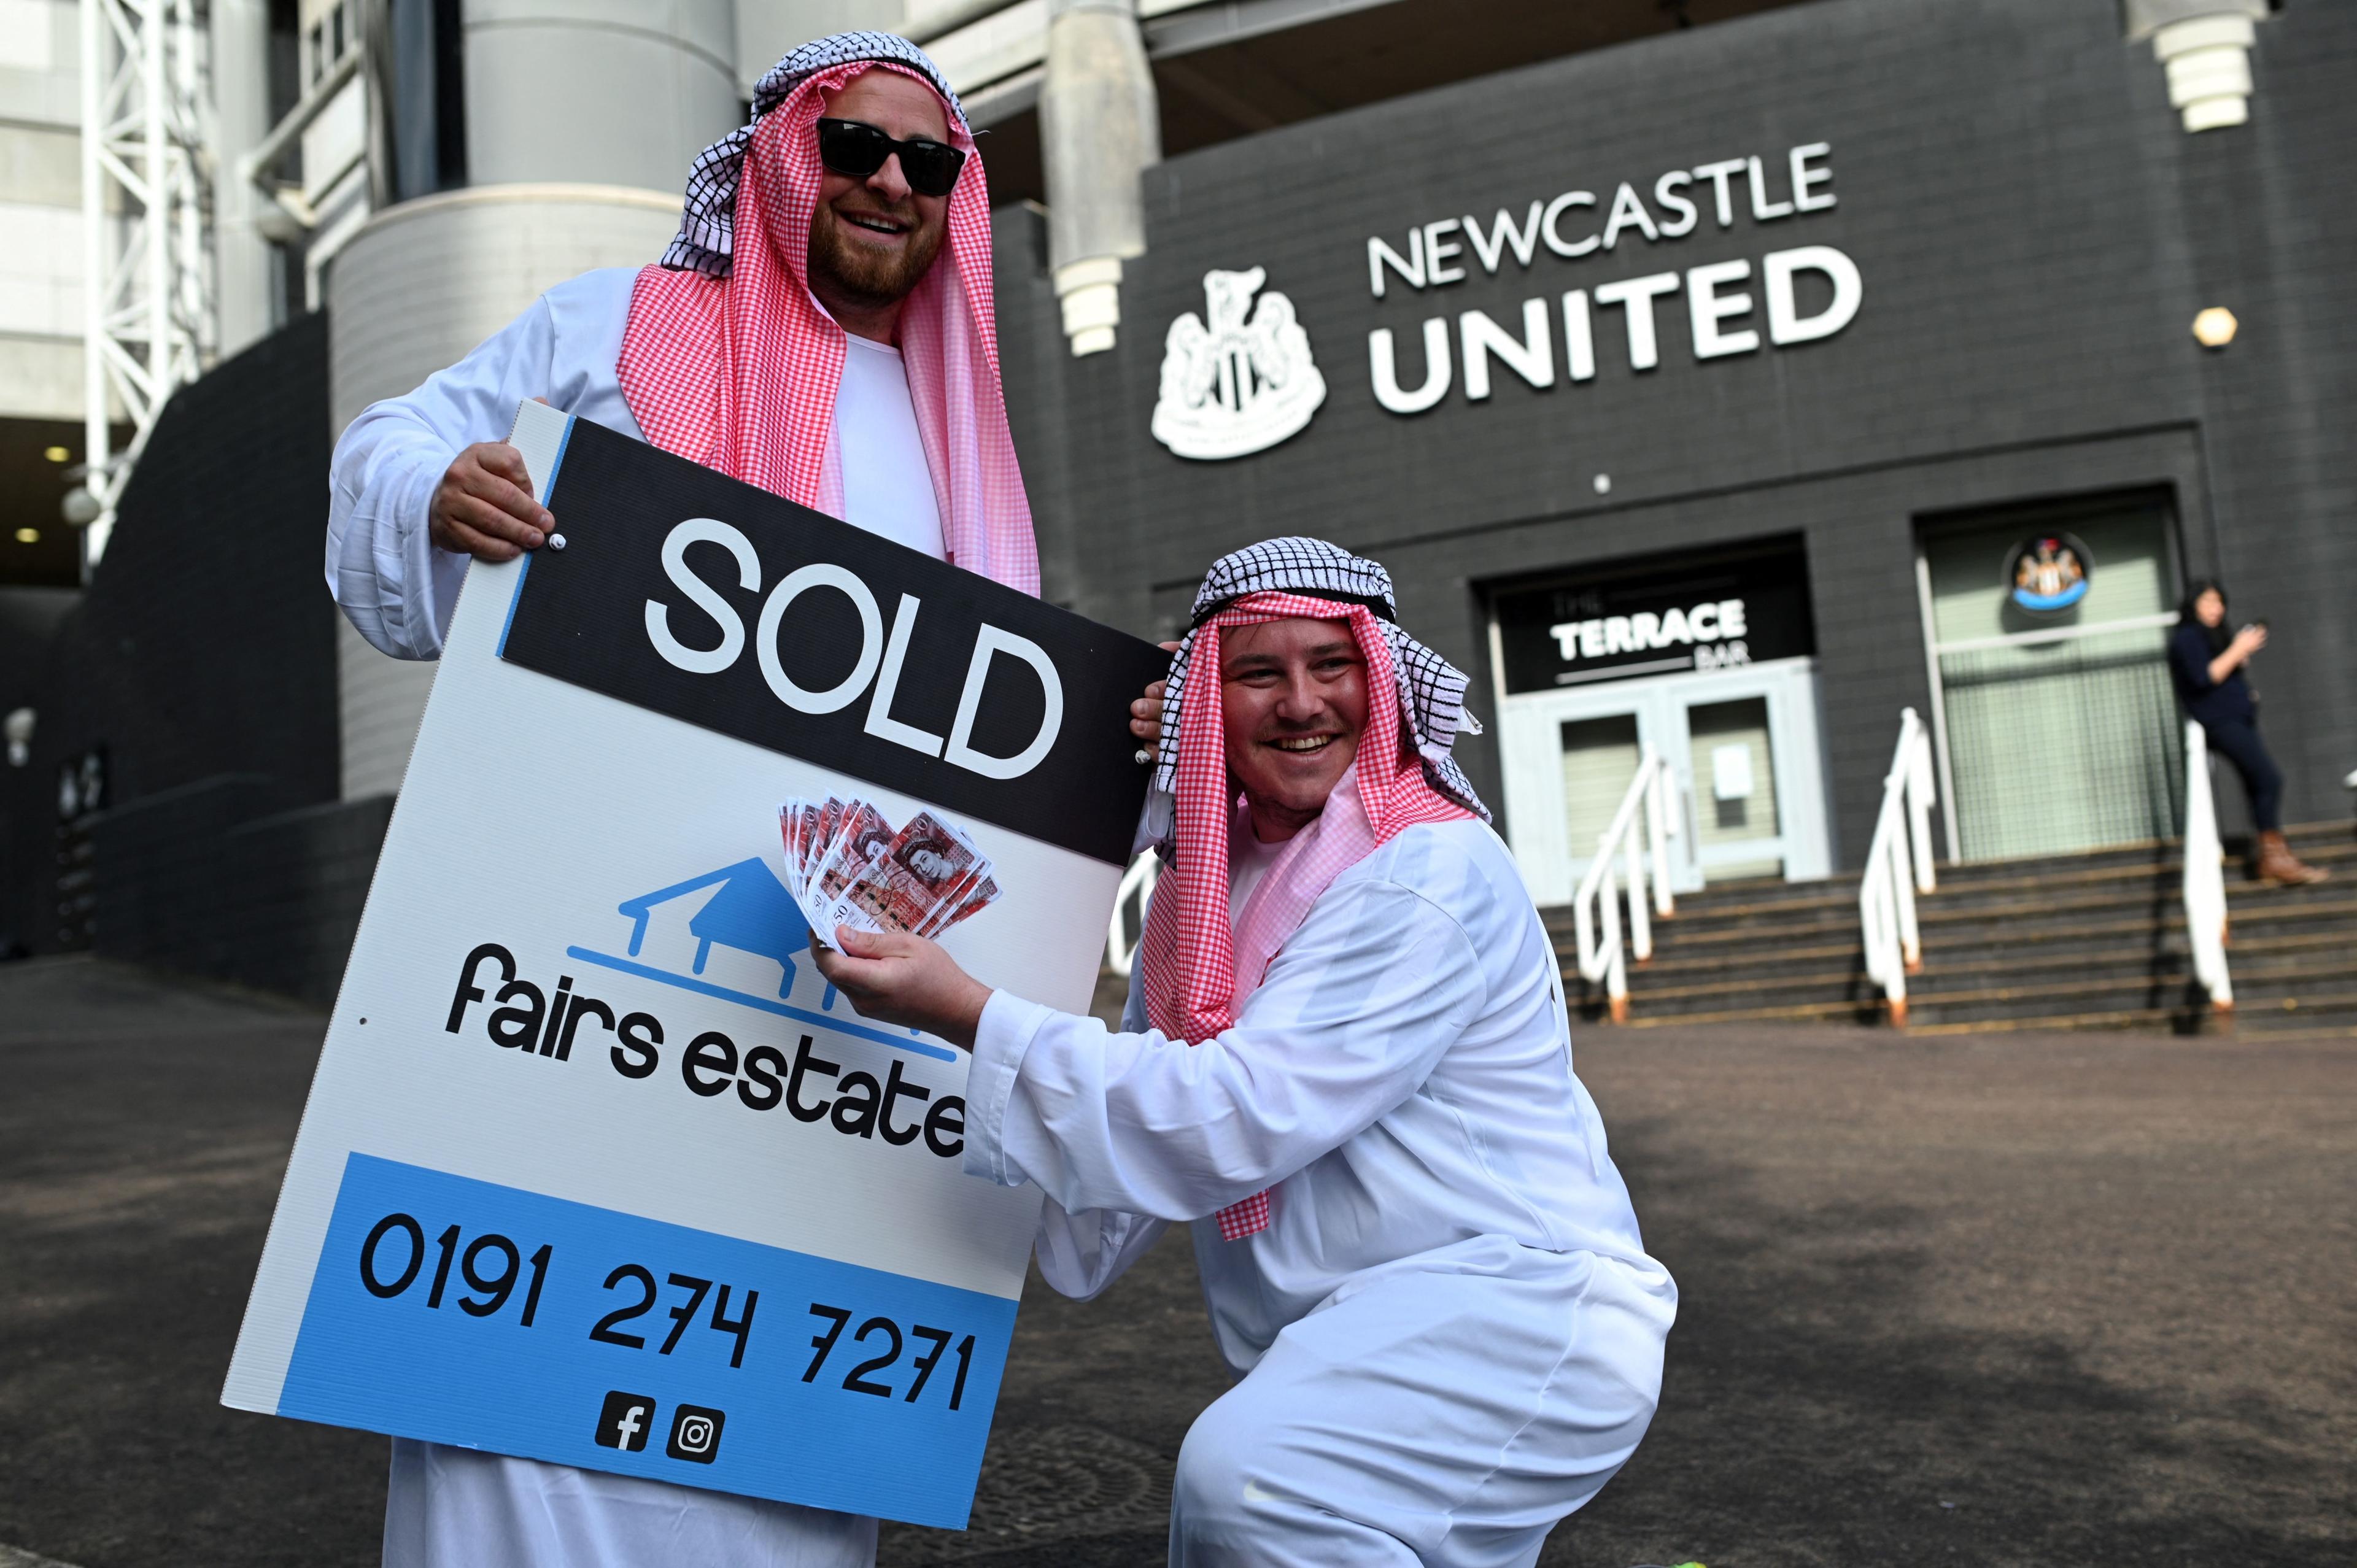 Newcastle United supporters dressed in robes pose with 'sold' placards as they celebrate the sale of the club to a Saudi-led consortium, outside the club's stadium at St James' Park in Newcastle upon Tyne in northeast England on October 8, 2021. - A Saudi-led consortium completed its takeover of Premier League club Newcastle United on October 7 despite warnings from Amnesty International that the deal represented 